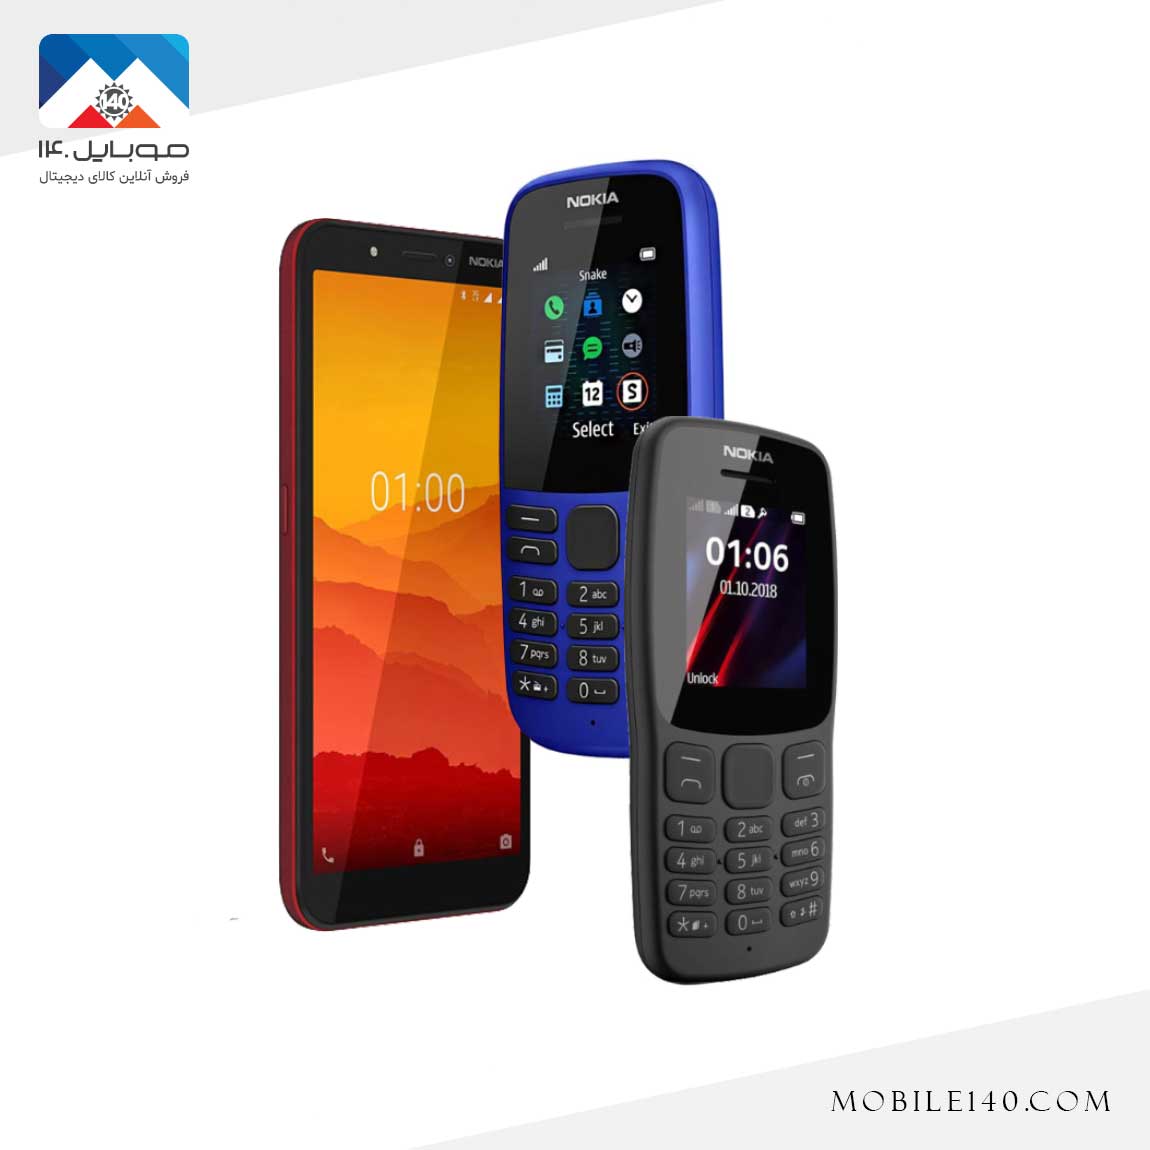 Nokia pack includes 3